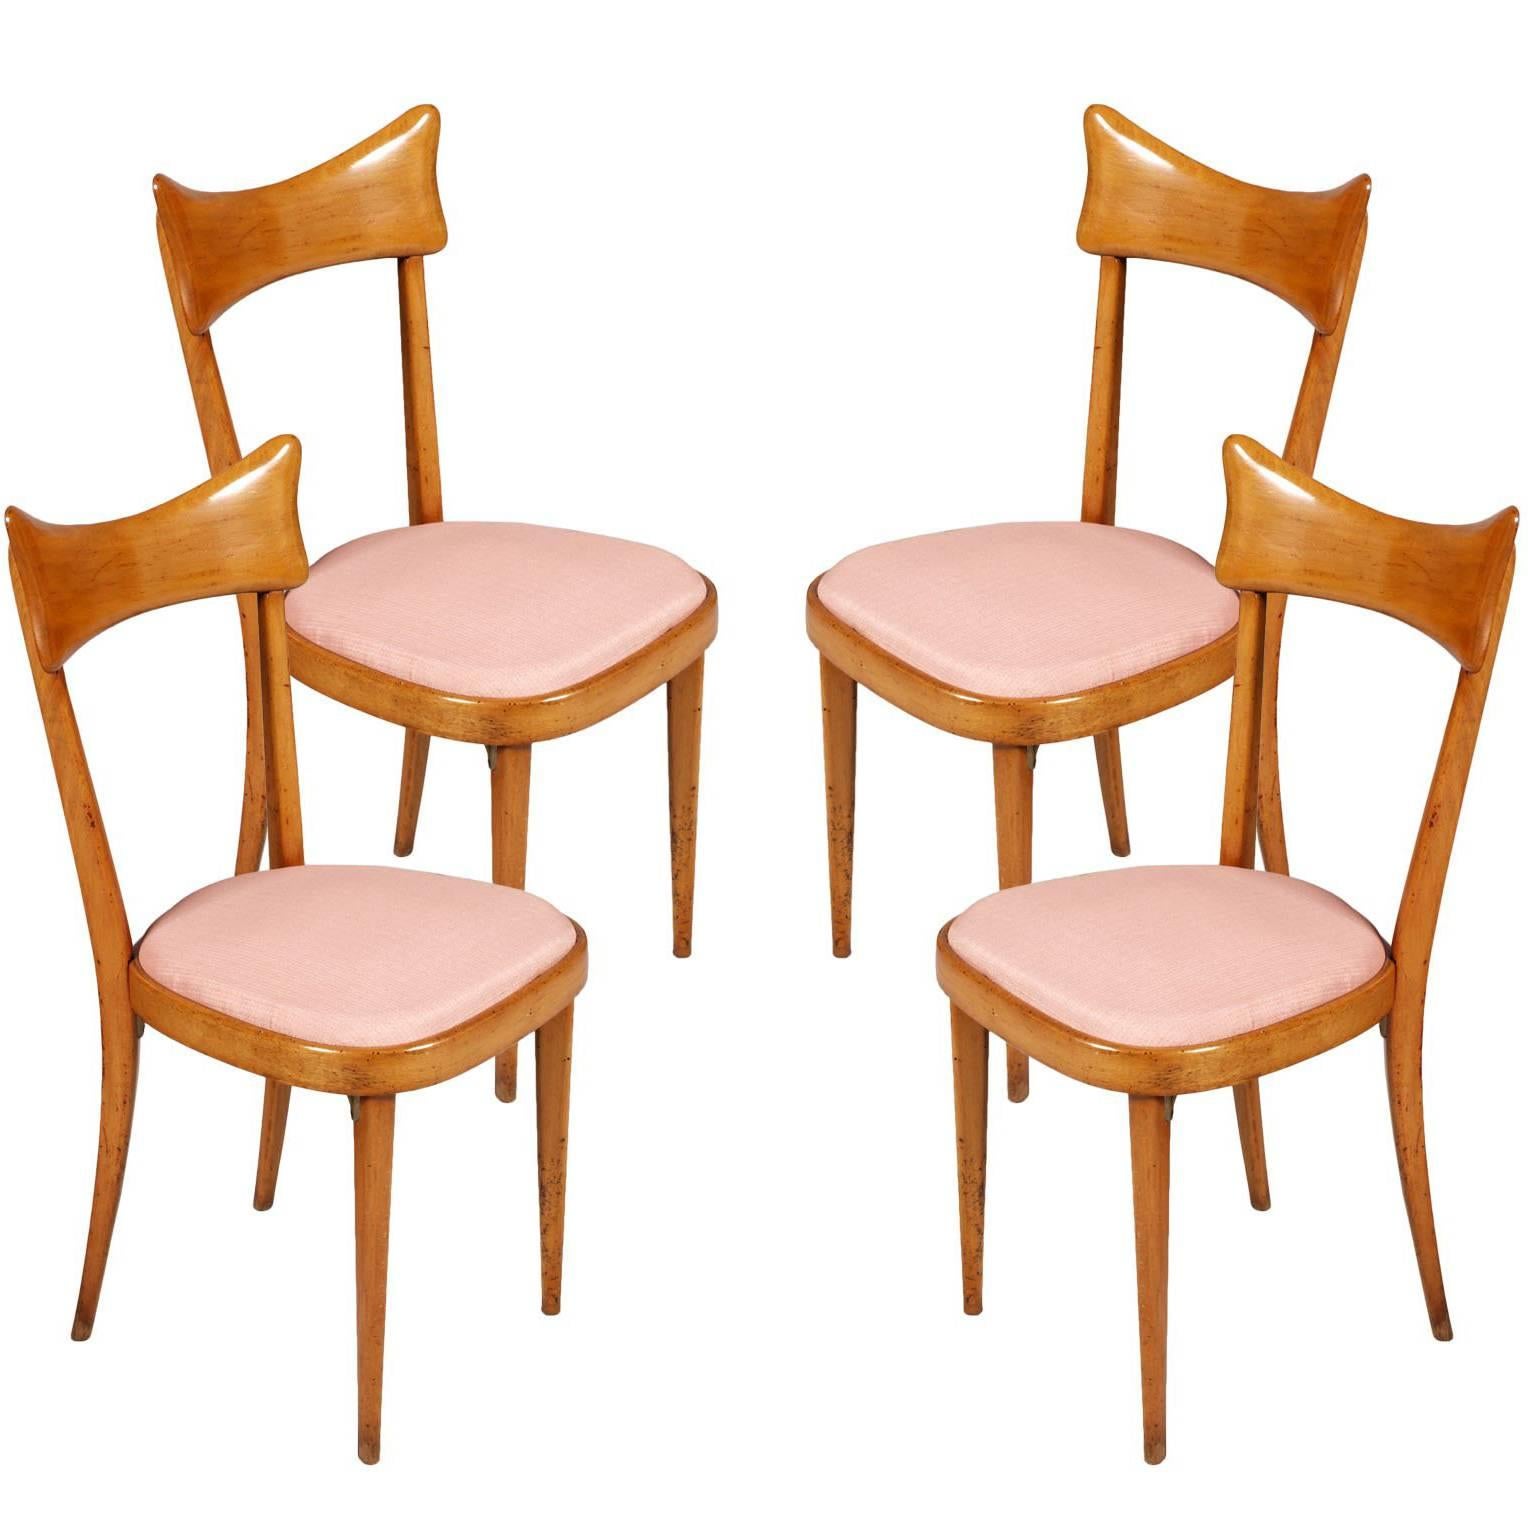 Mid-Century Modern Set of Four Chairs, Ico Parisi Manner in Blond Walnut For Sale